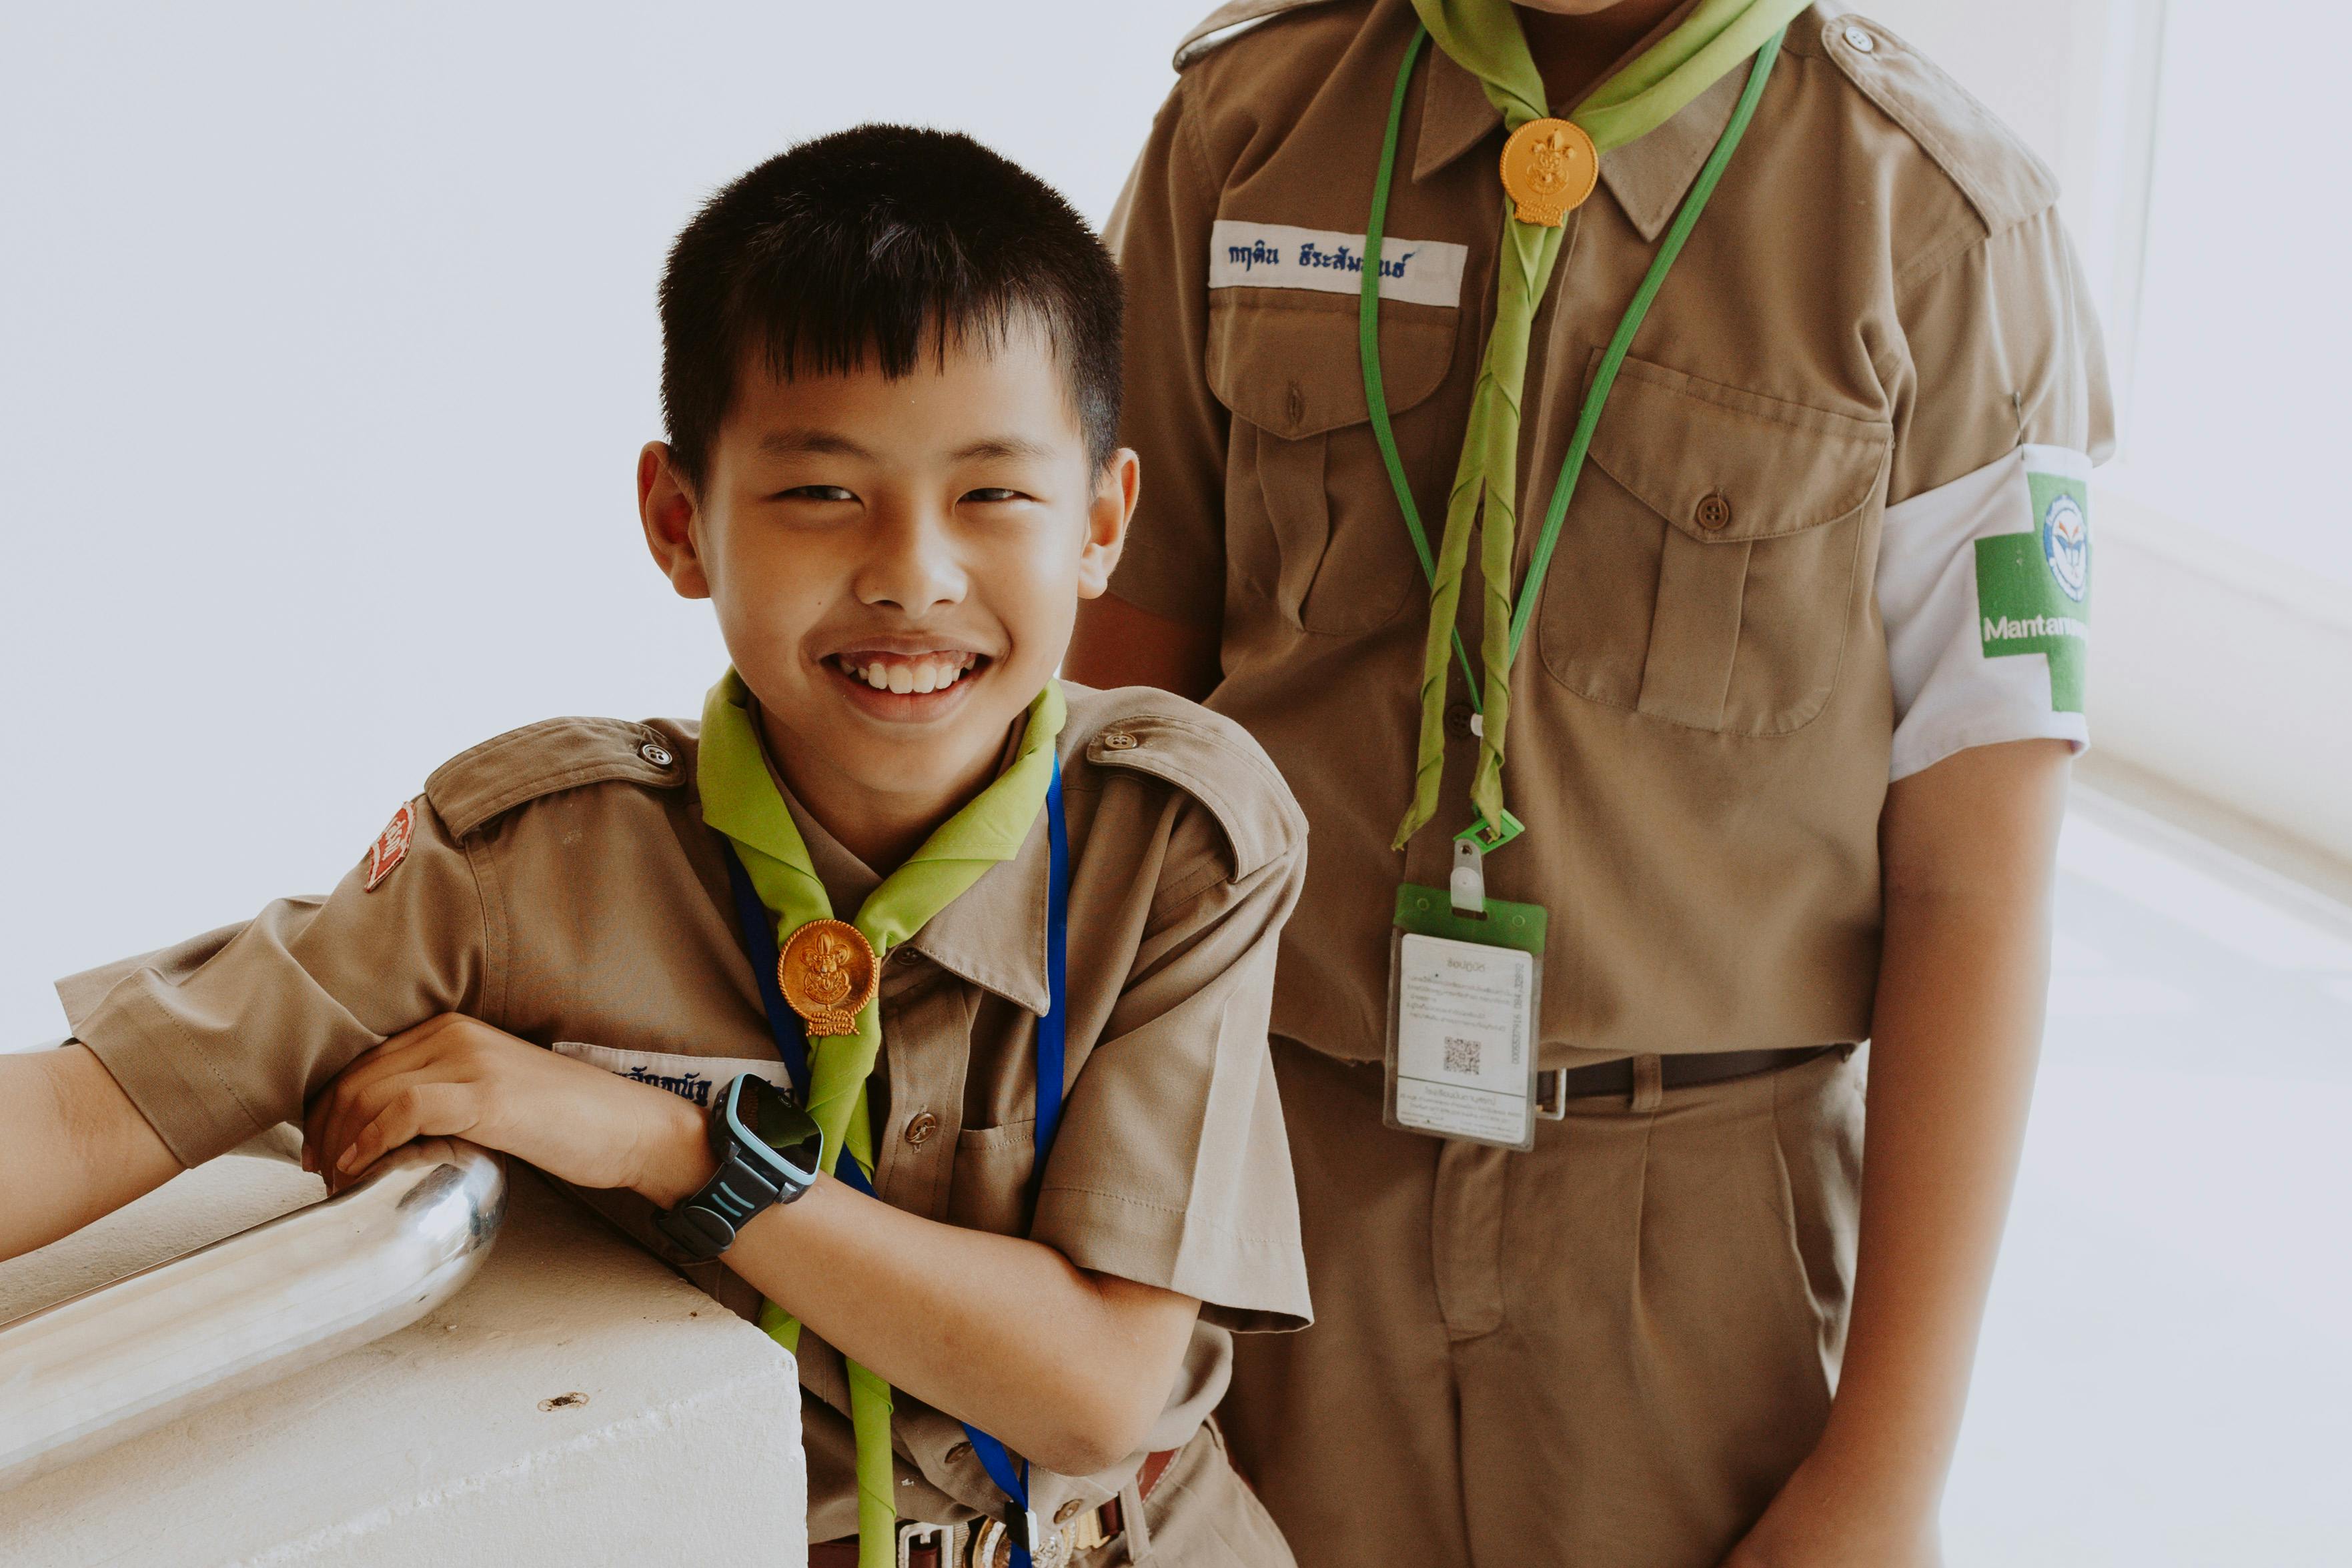 A Young Boy in Boy Scout Uniform with Smiling Face · Free Stock Photo